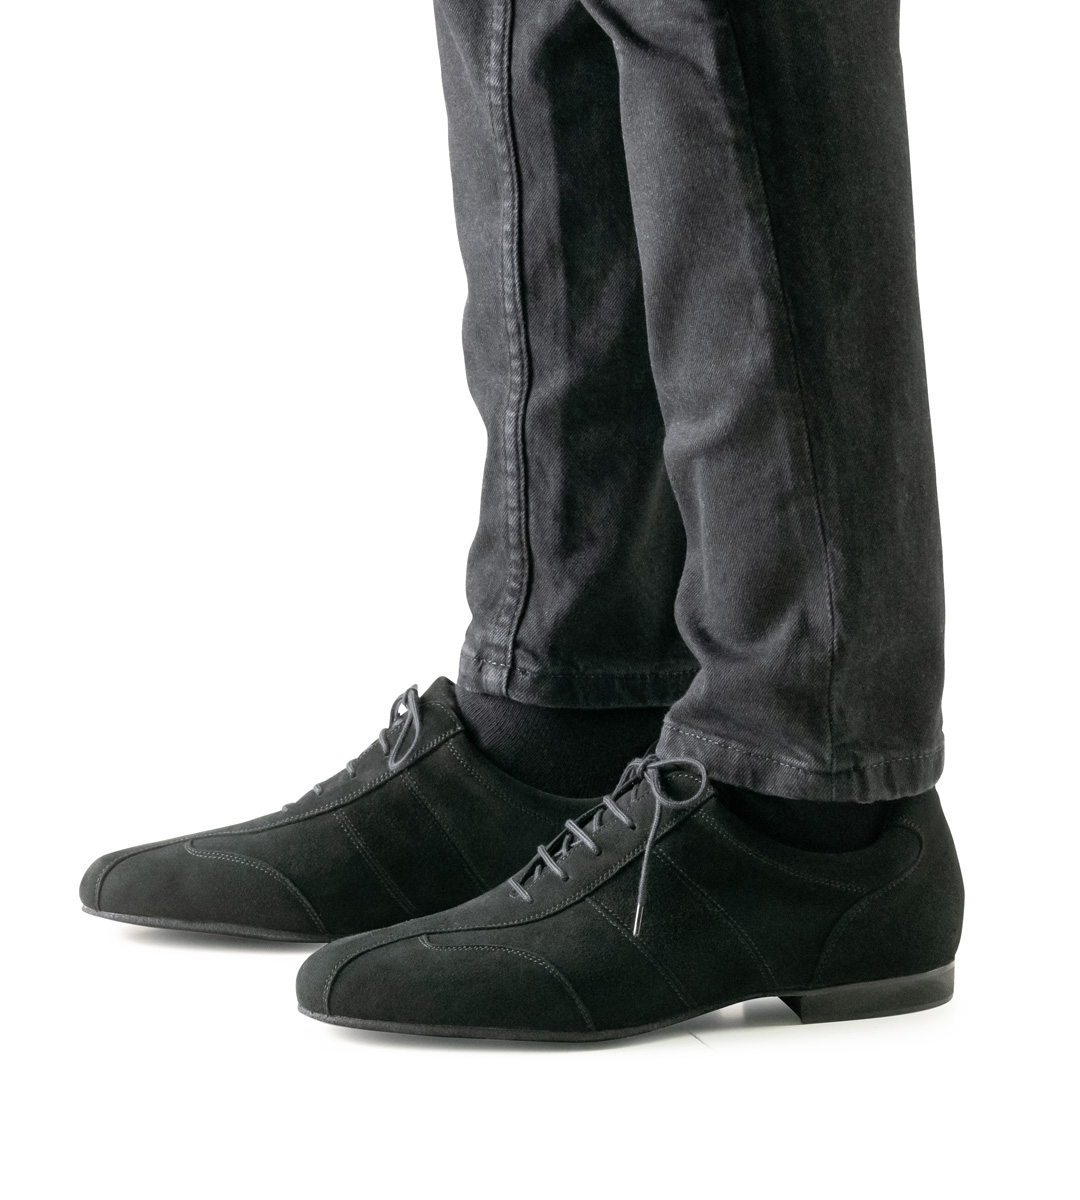 grey jeans in combination with black men's dance shoe by Werner Kern for Salsa